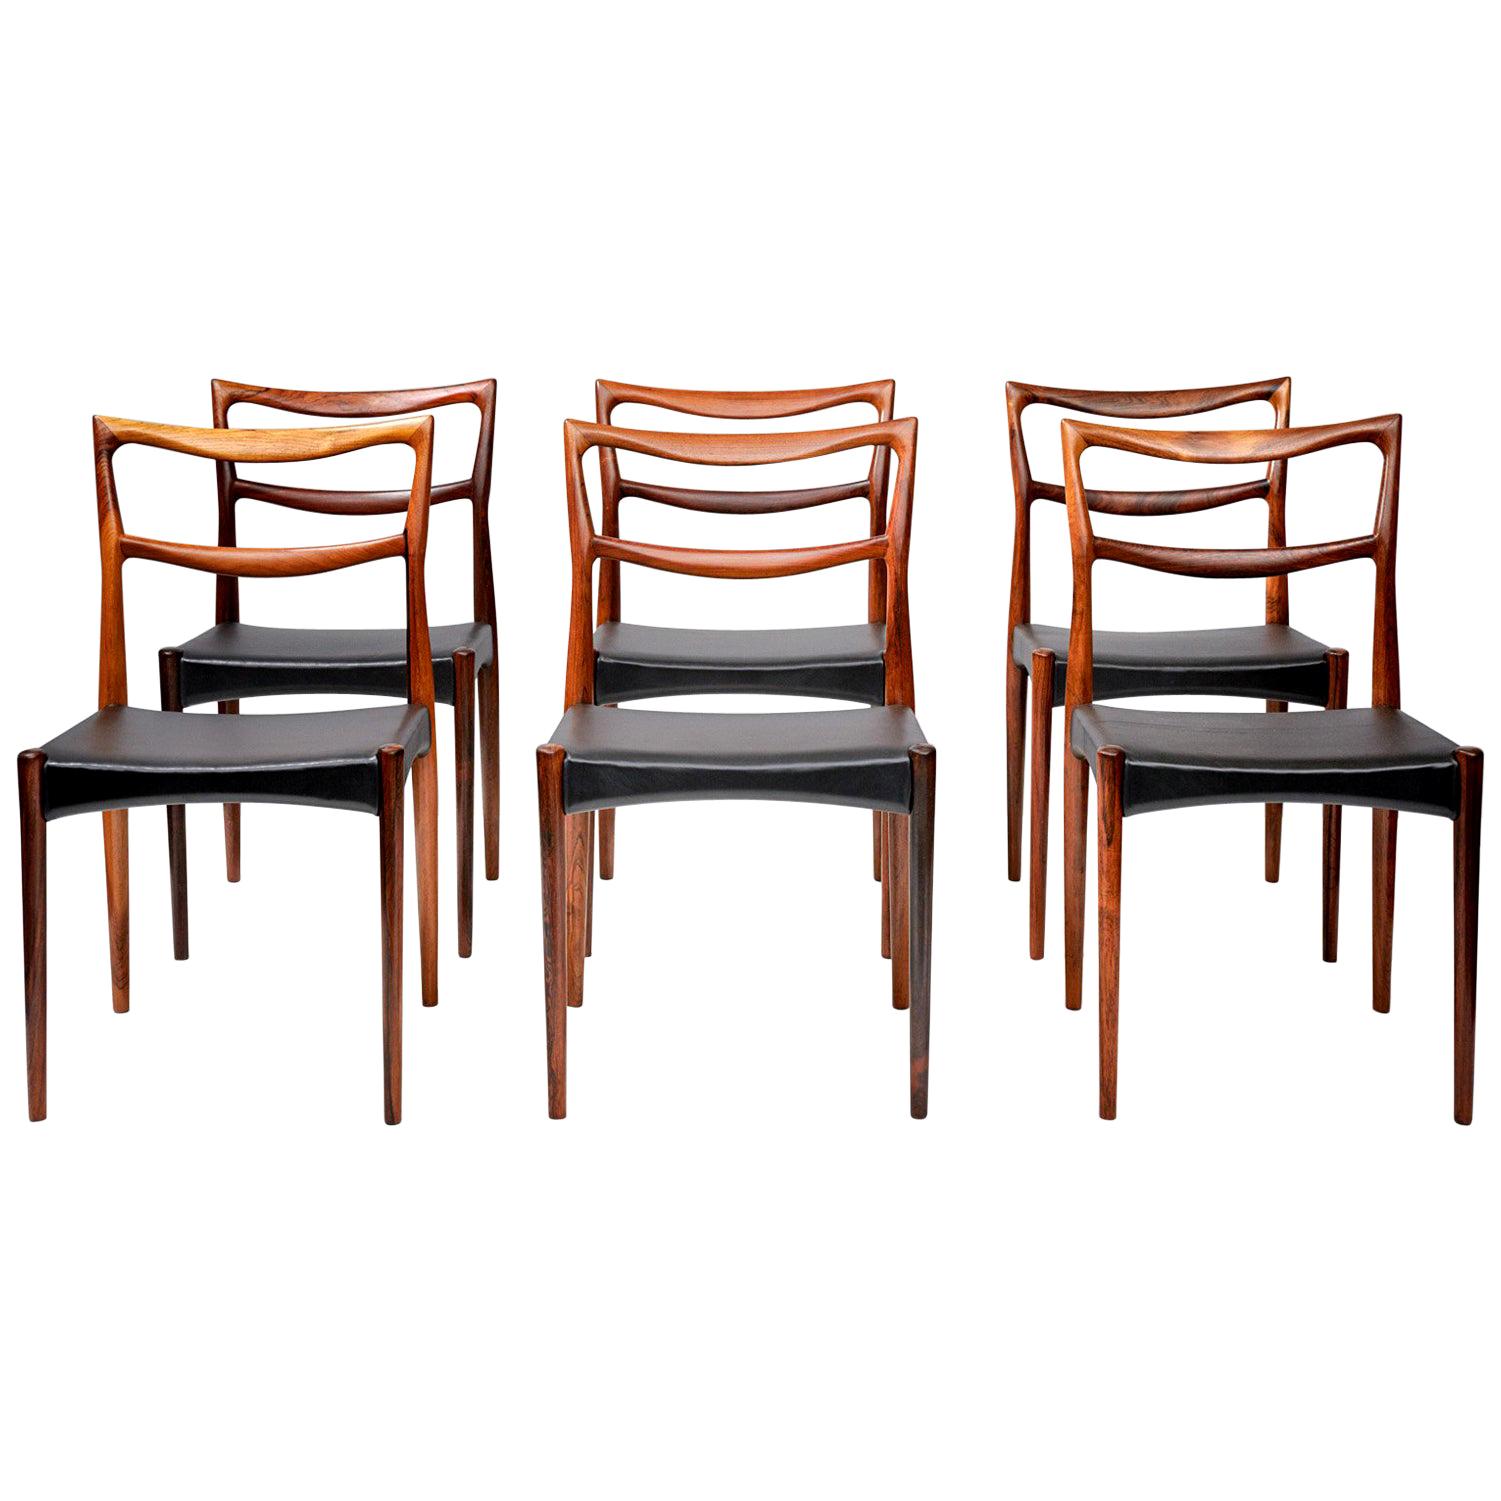 Set of 6 Henry W. Klein Rosewood Dining Chairs, circa 1960